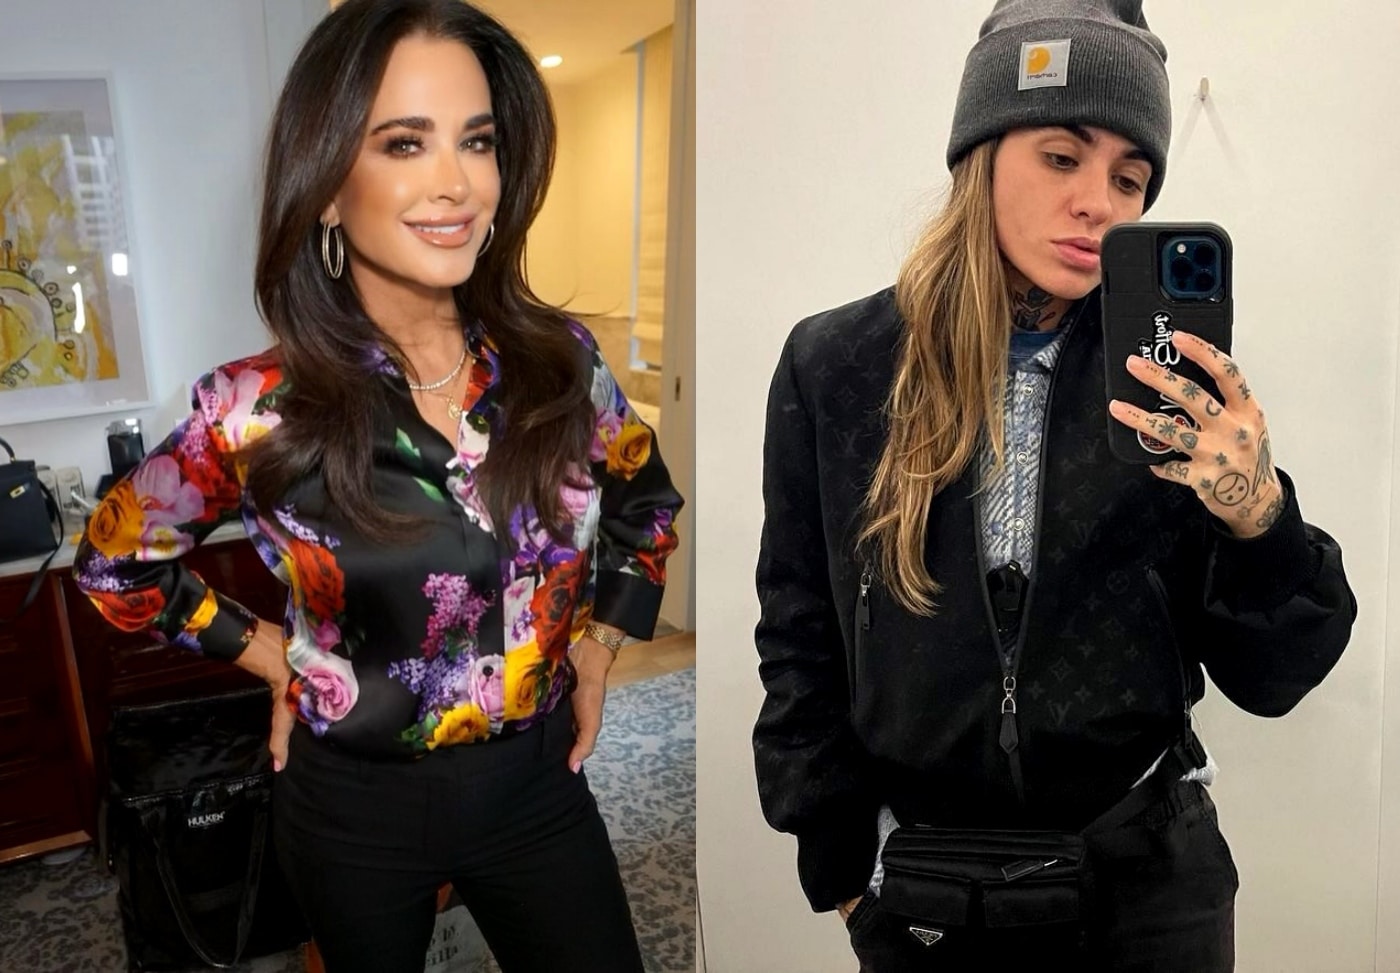 PHOTOS: RHOBH Star Kyle Richards Steps Out With Morgan Wade Amid Potential 'Ultimatum' to Showcase Their Relationship on Season 14